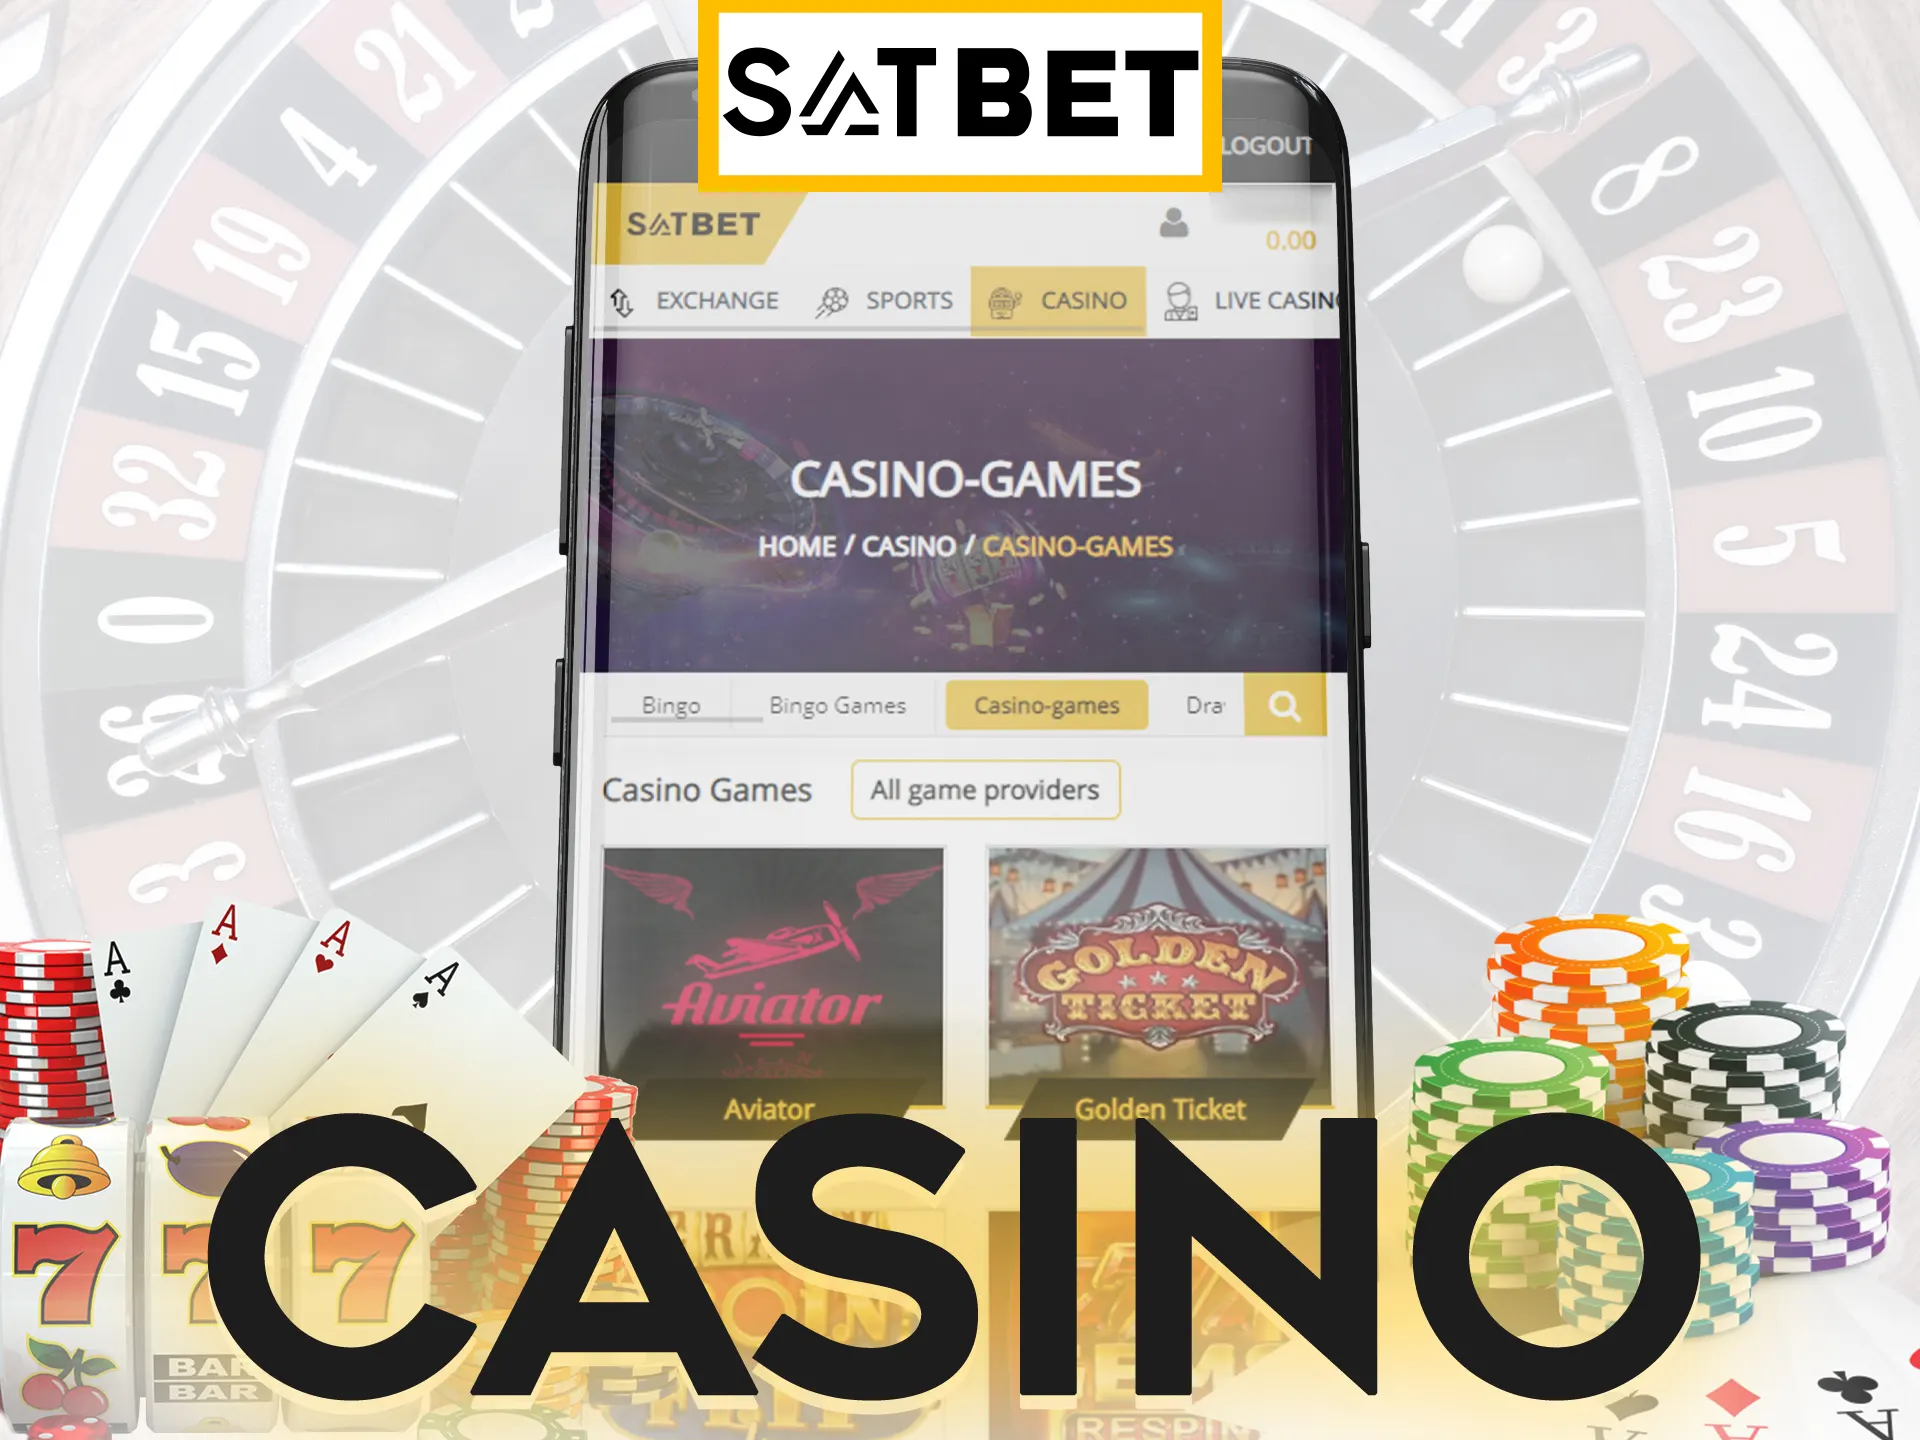 Enter in Satbet casino using app and start playing casino games.